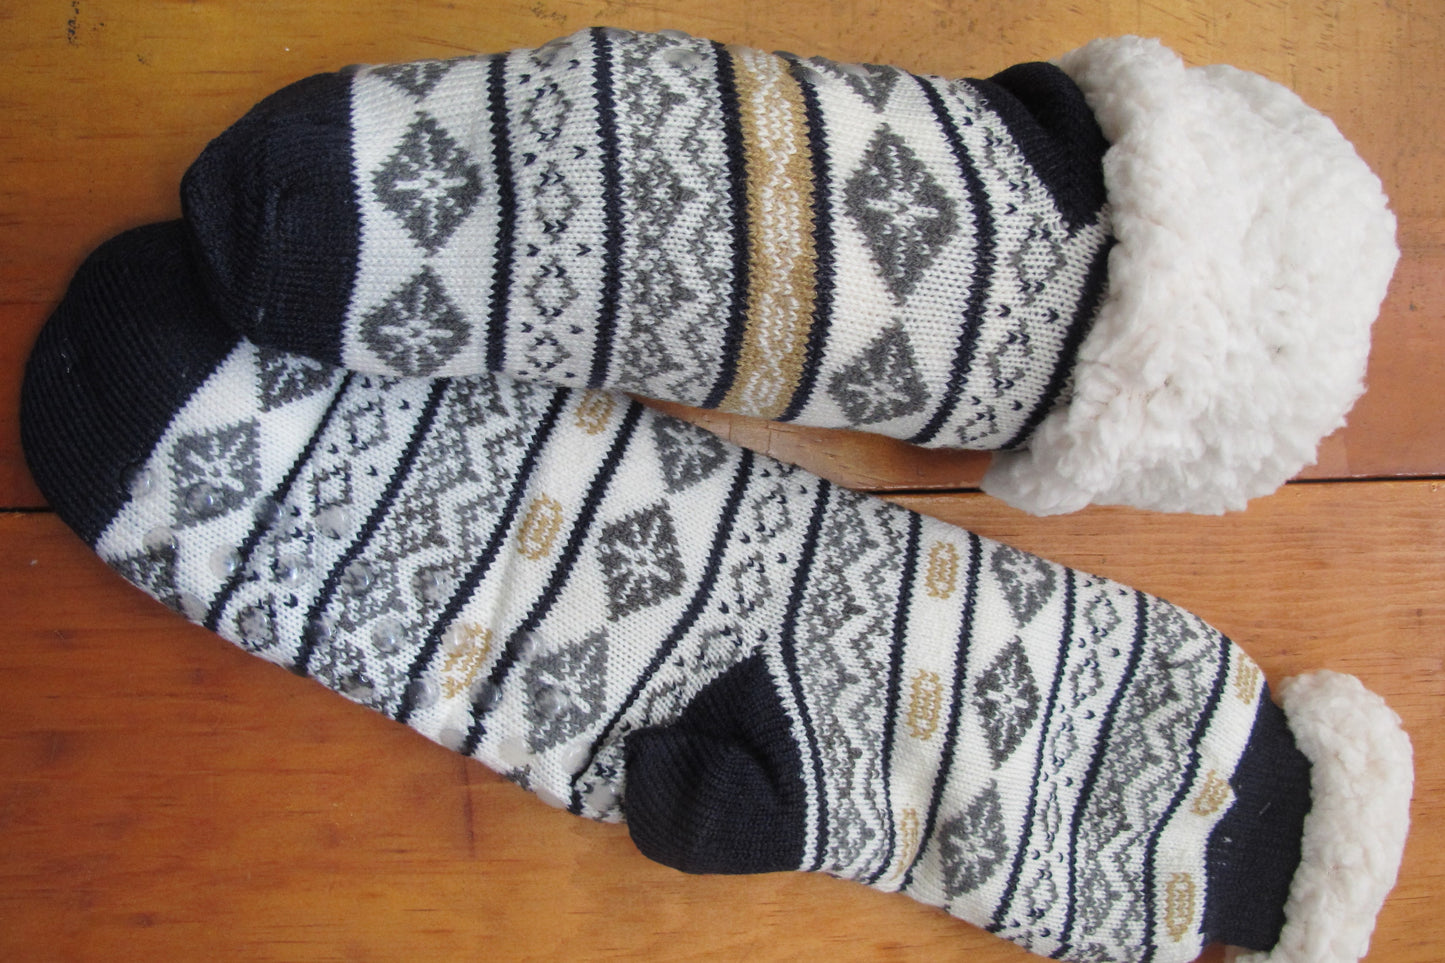 Sherpa-Lined Cabin Socks.  Image shows black and brown color.  Snowflake/faireisle desgin